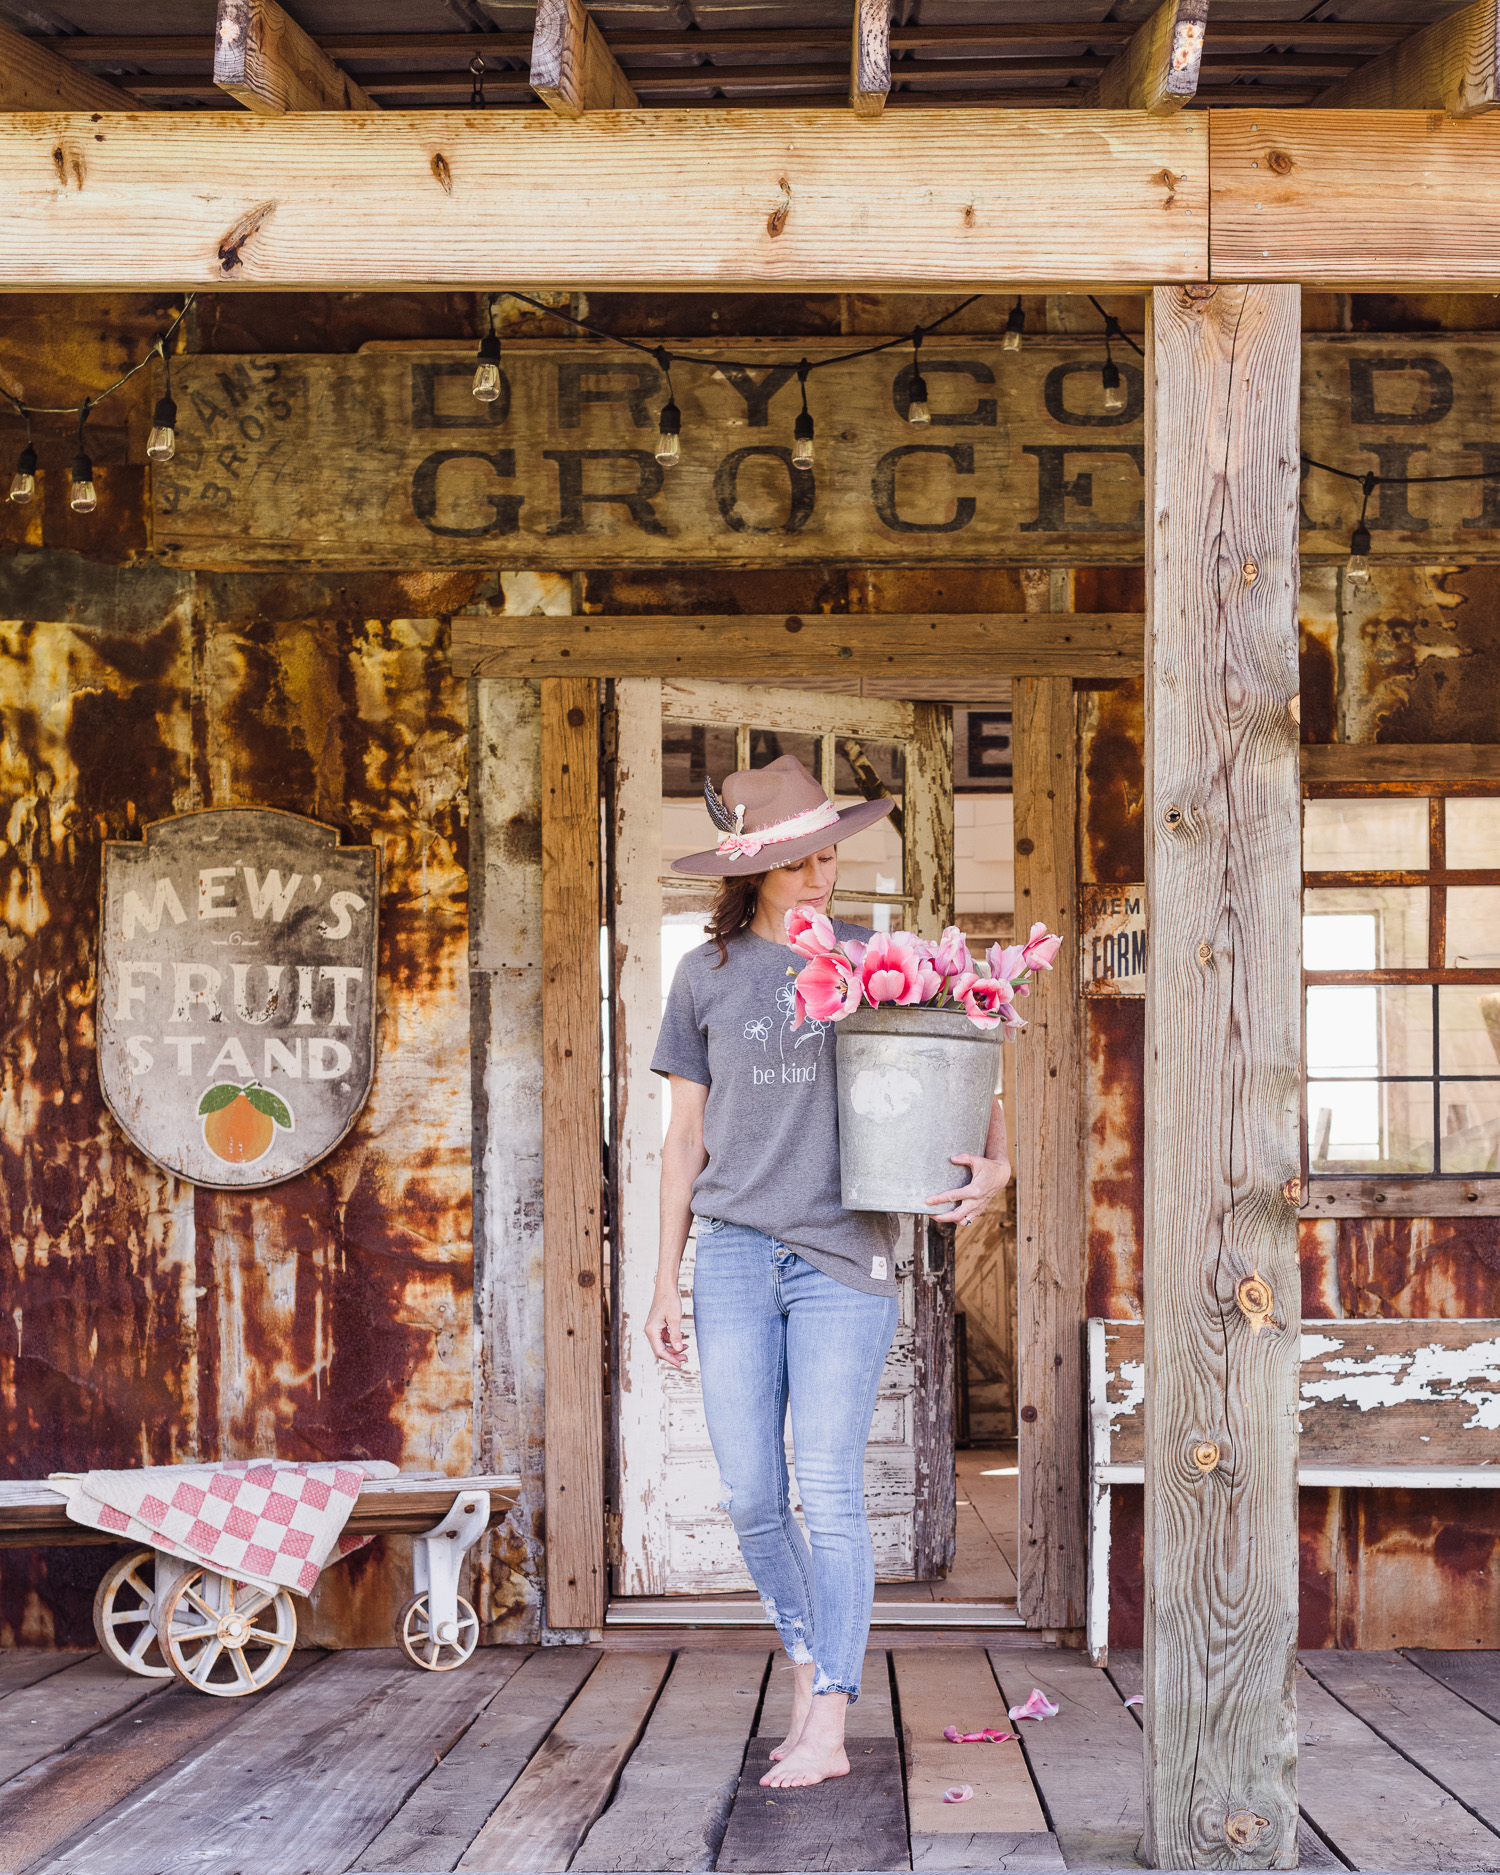 Self Portrait of me with a vintage sap bucket filled with tulips. Barn Porch